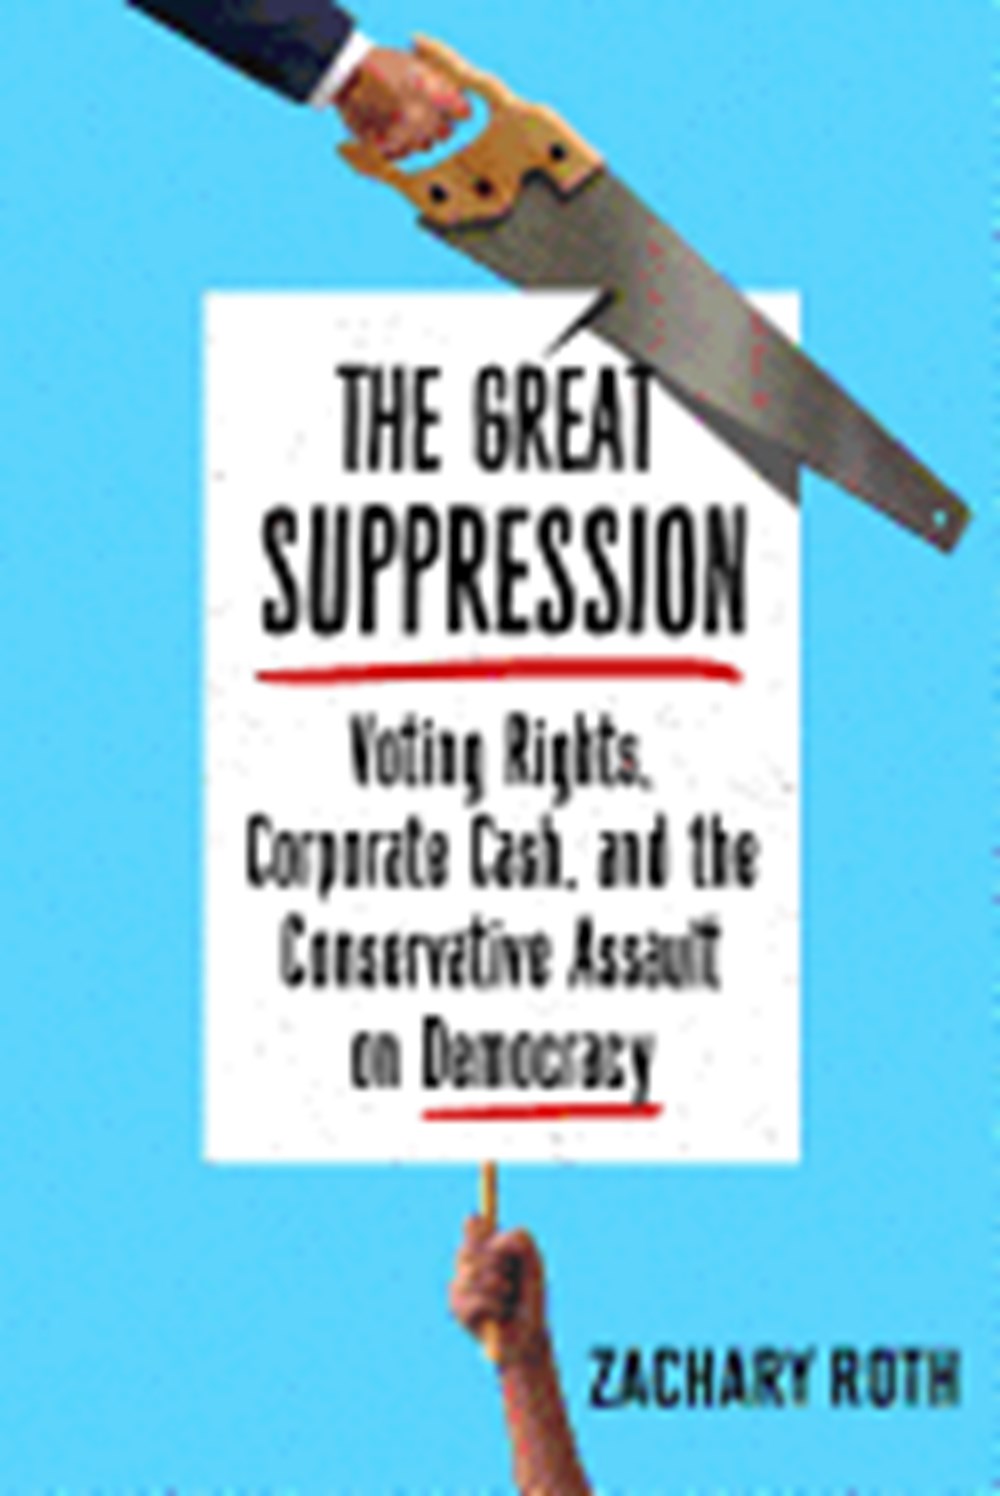 Great Suppression: Voting Rights, Corporate Cash, and the Conservative Assault on Democracy